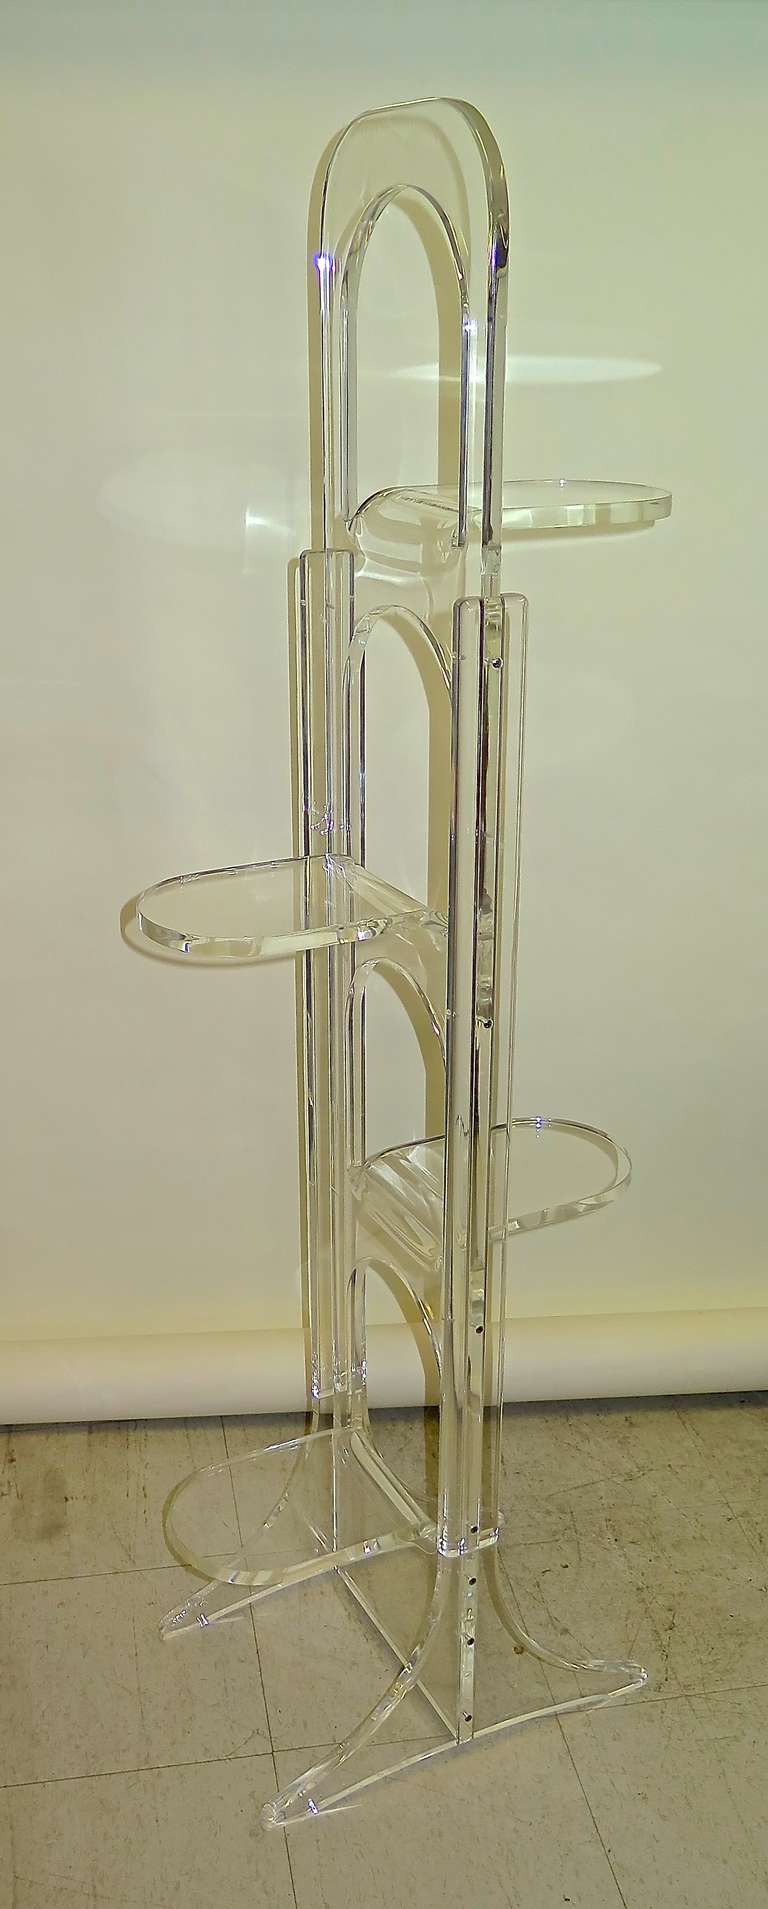 Unusual shape. 5/8 inches thick lucite. 4 bent shelves. Few scratches and scuffs. Great for small spaces.